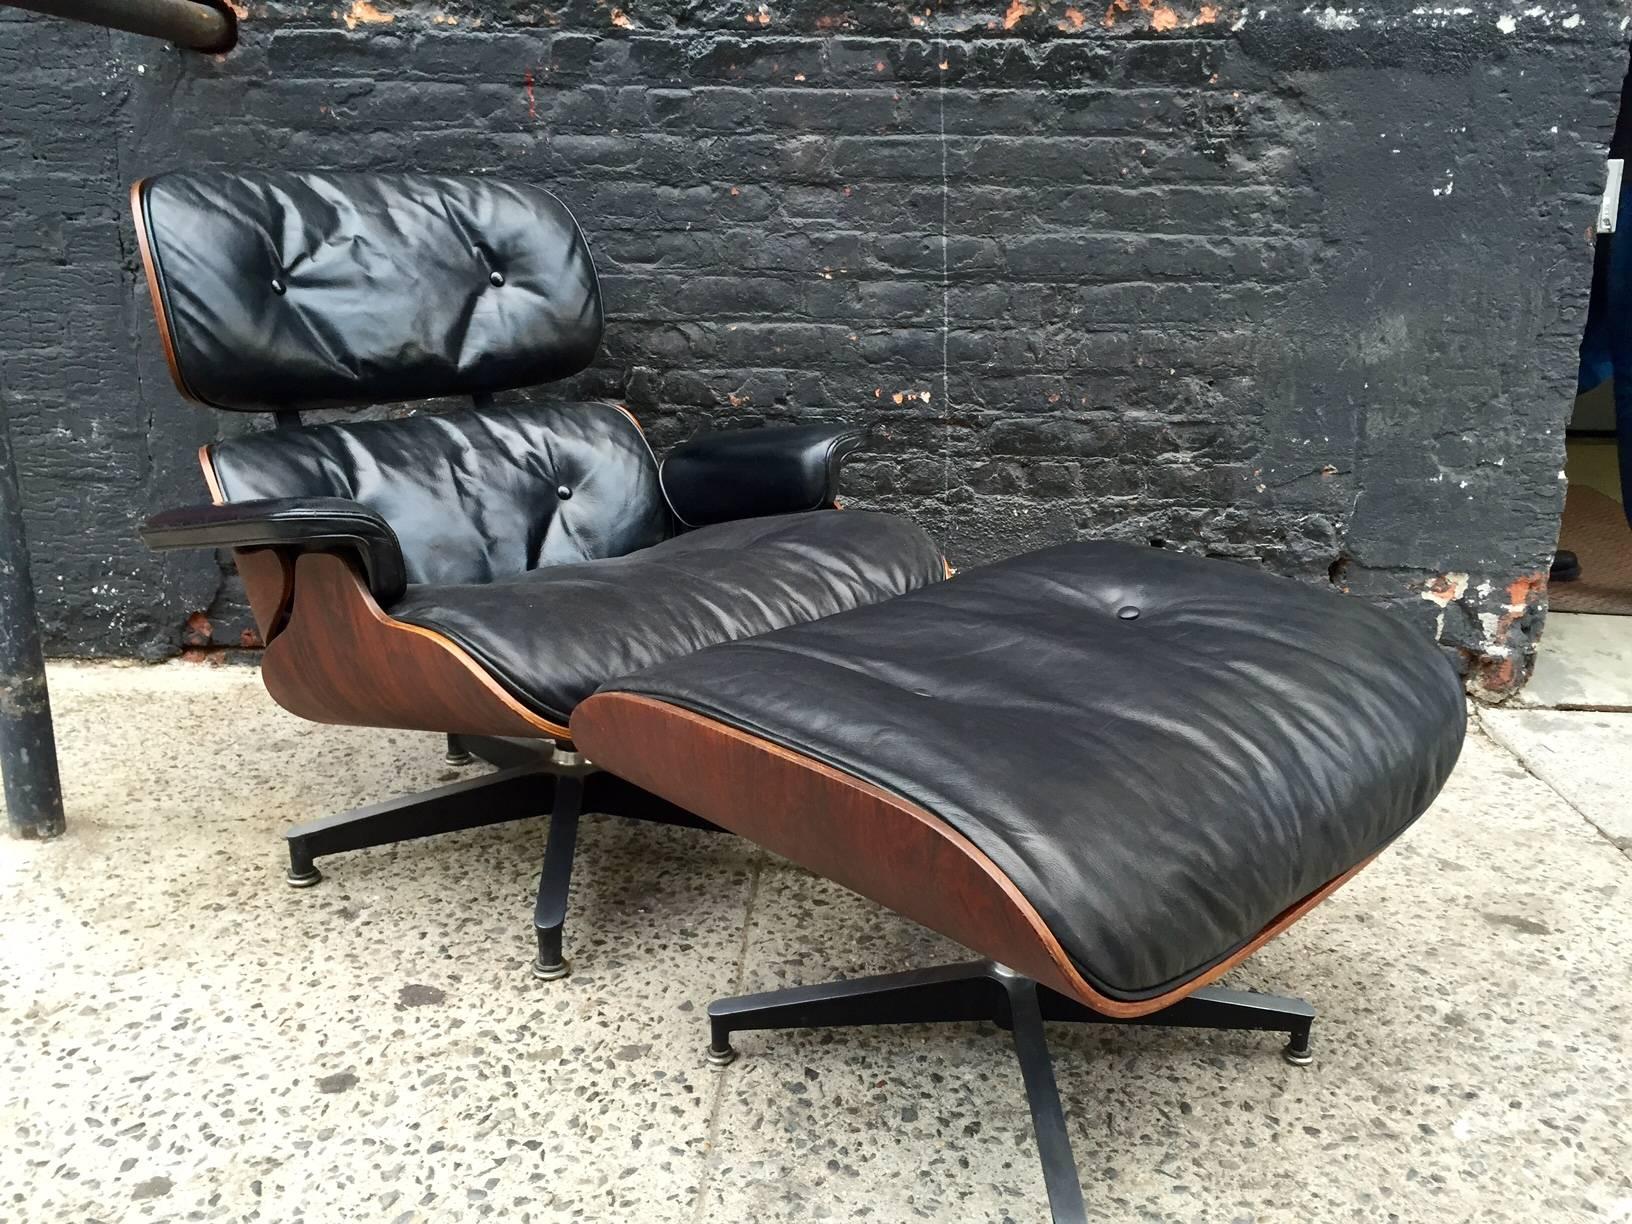 Charles & Ray Eames lounge chair and ottoman of rosewood with black leather upholstery. This is a second year edition, a coveted chair for Eames collectors, as evidenced by the three screws in the mounting plate under the arm.  

Dimensions of